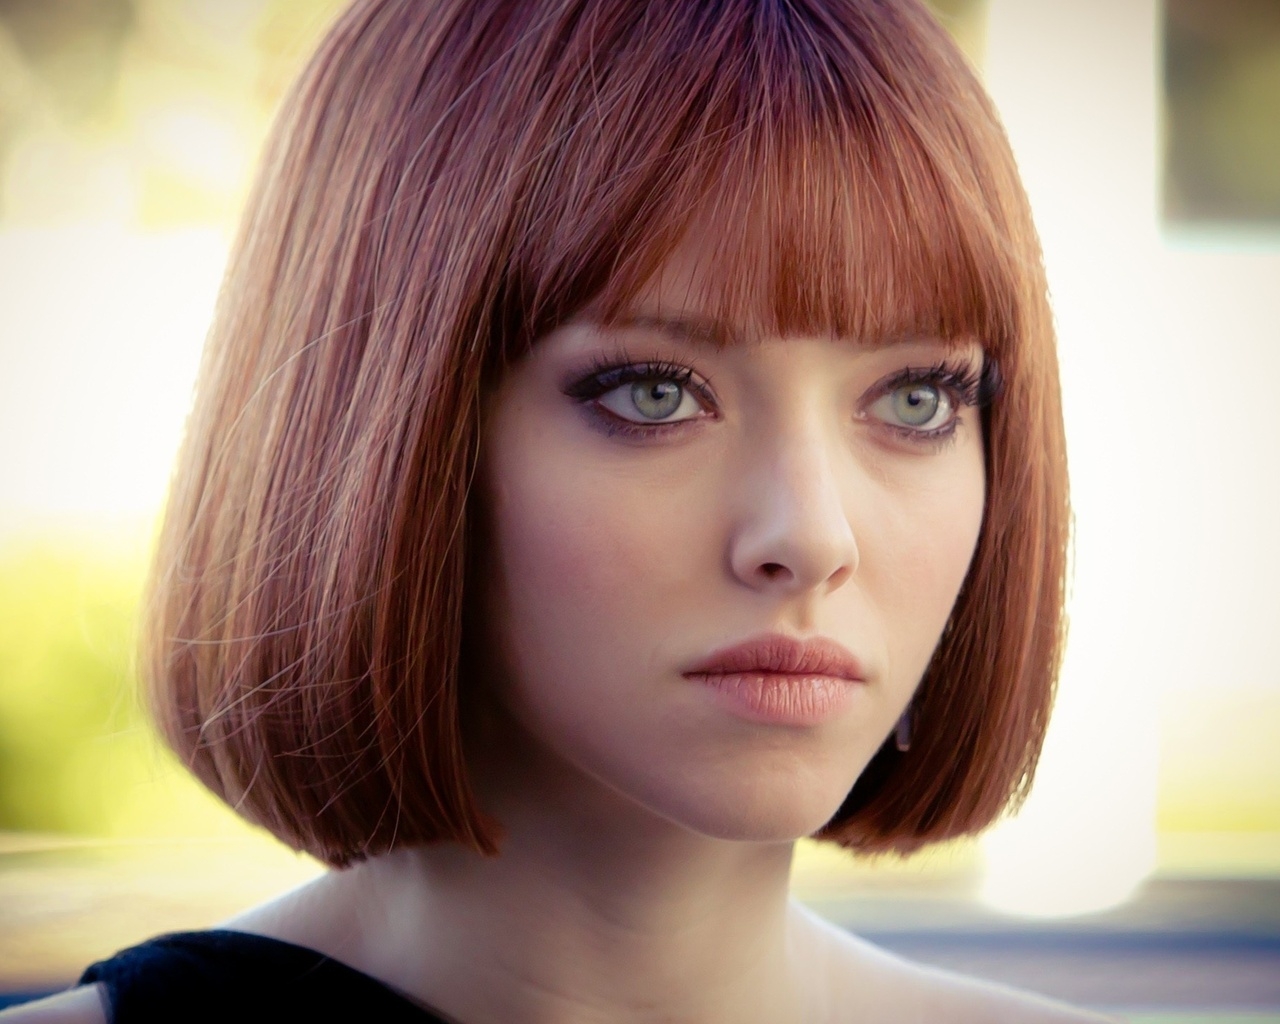 Amanda Seyfried In Time for 1280 x 1024 resolution